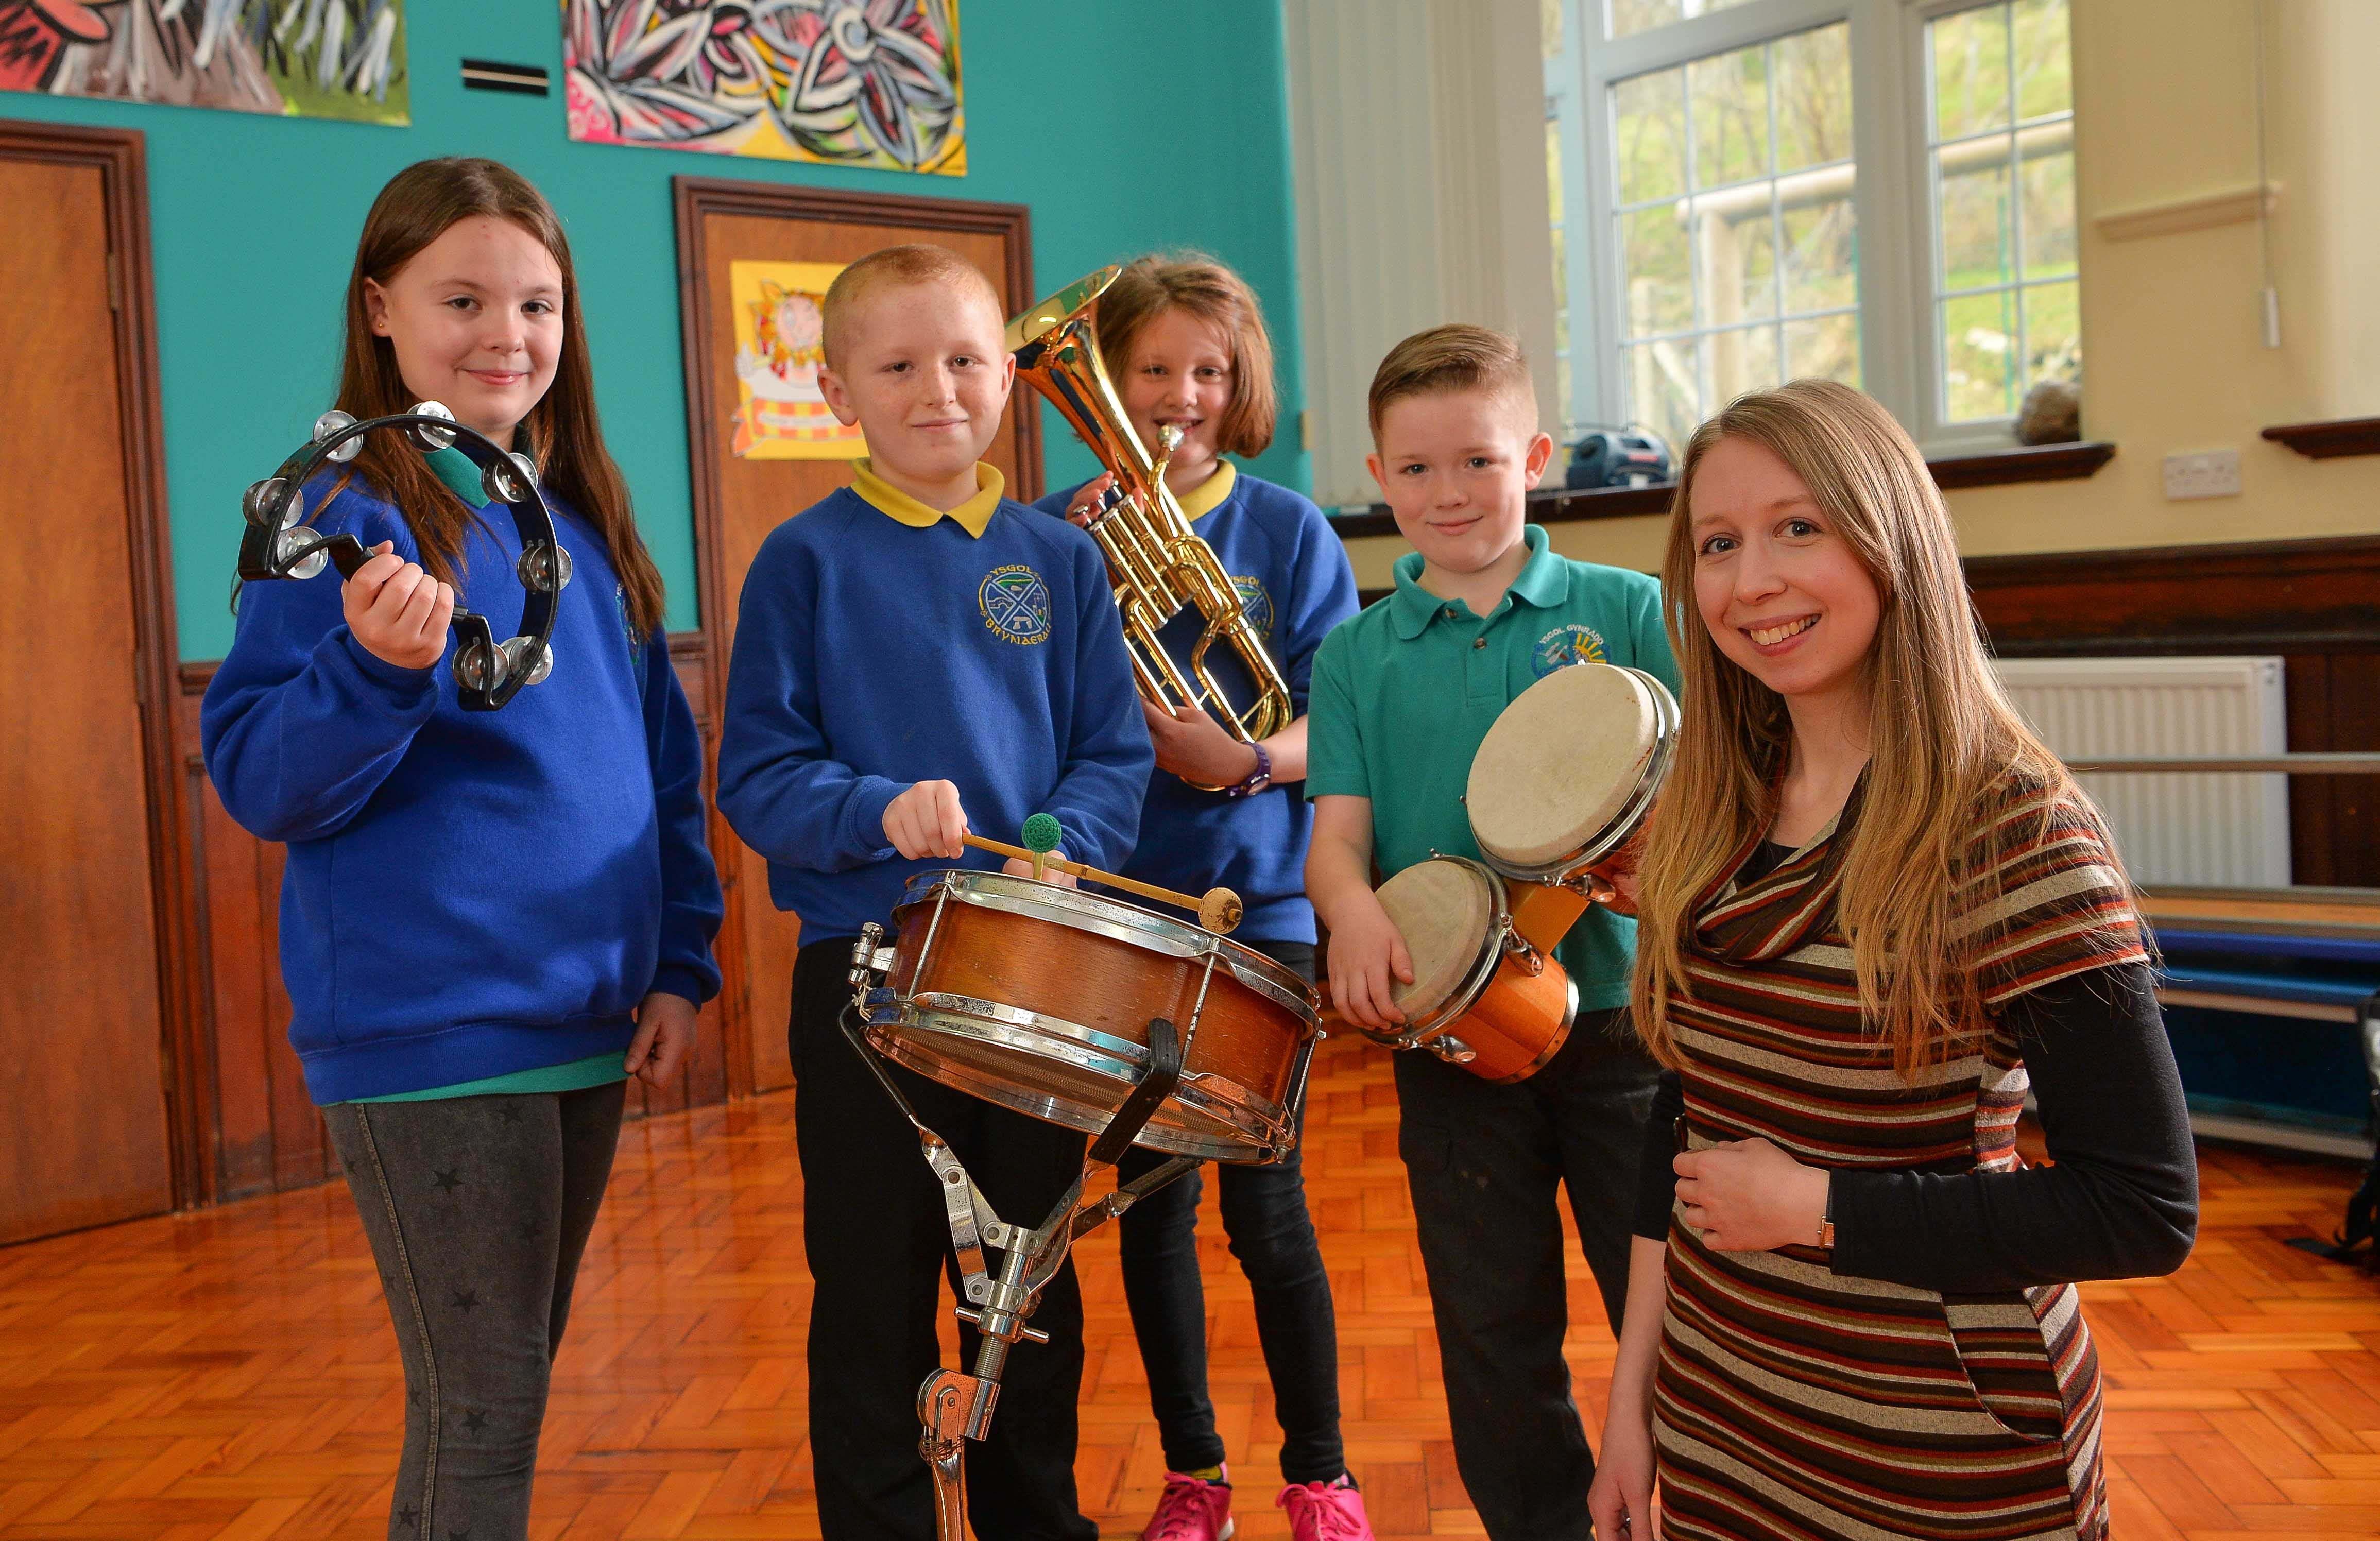 Syrian refugee crisis inspires Gwynedd pupils to compose new musical work